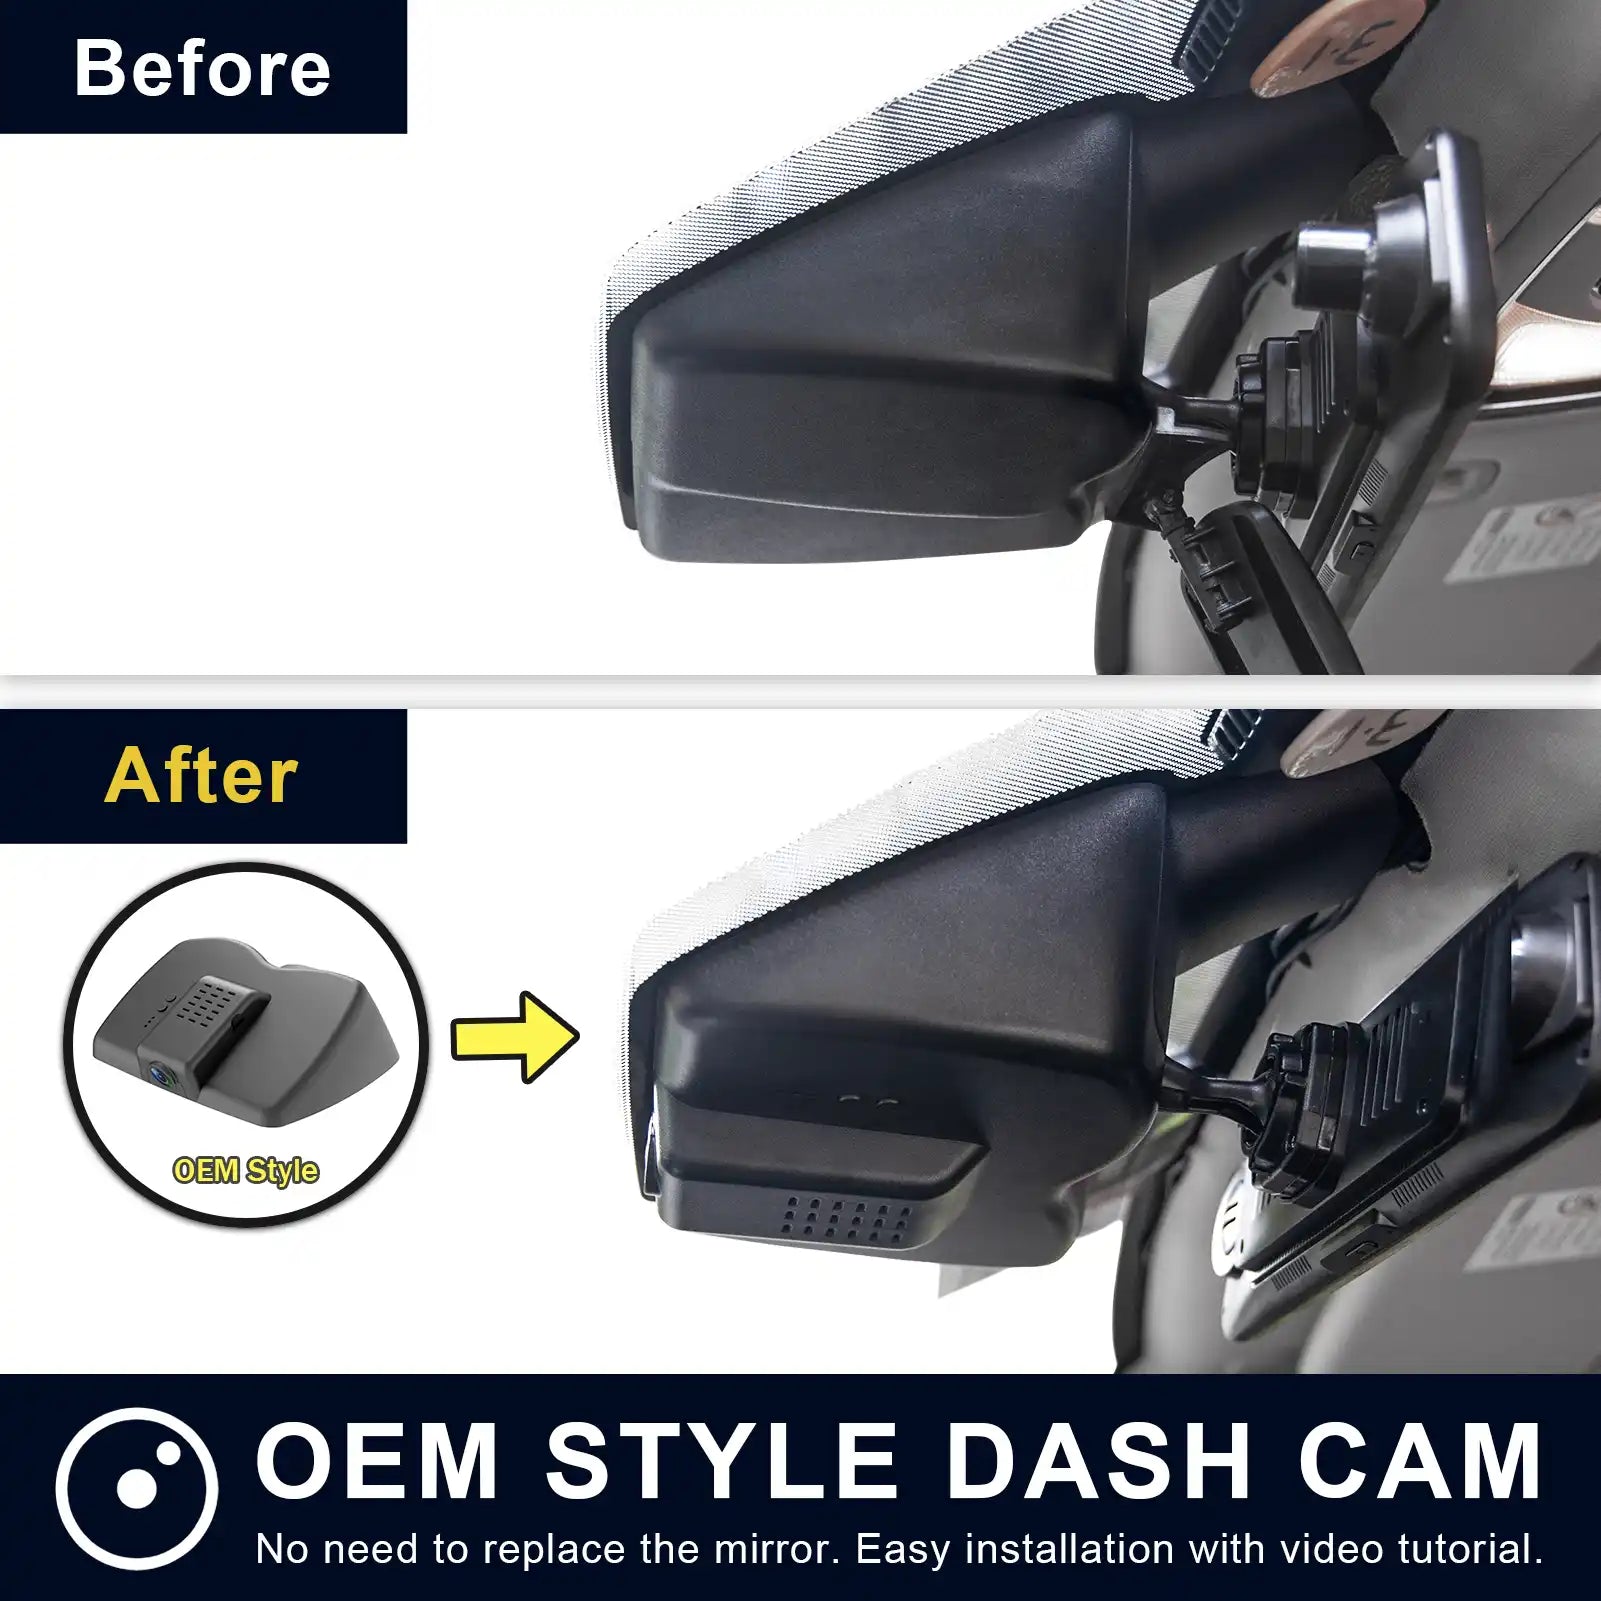 Jeep Gen Cherokee dash cam before and after installation view 